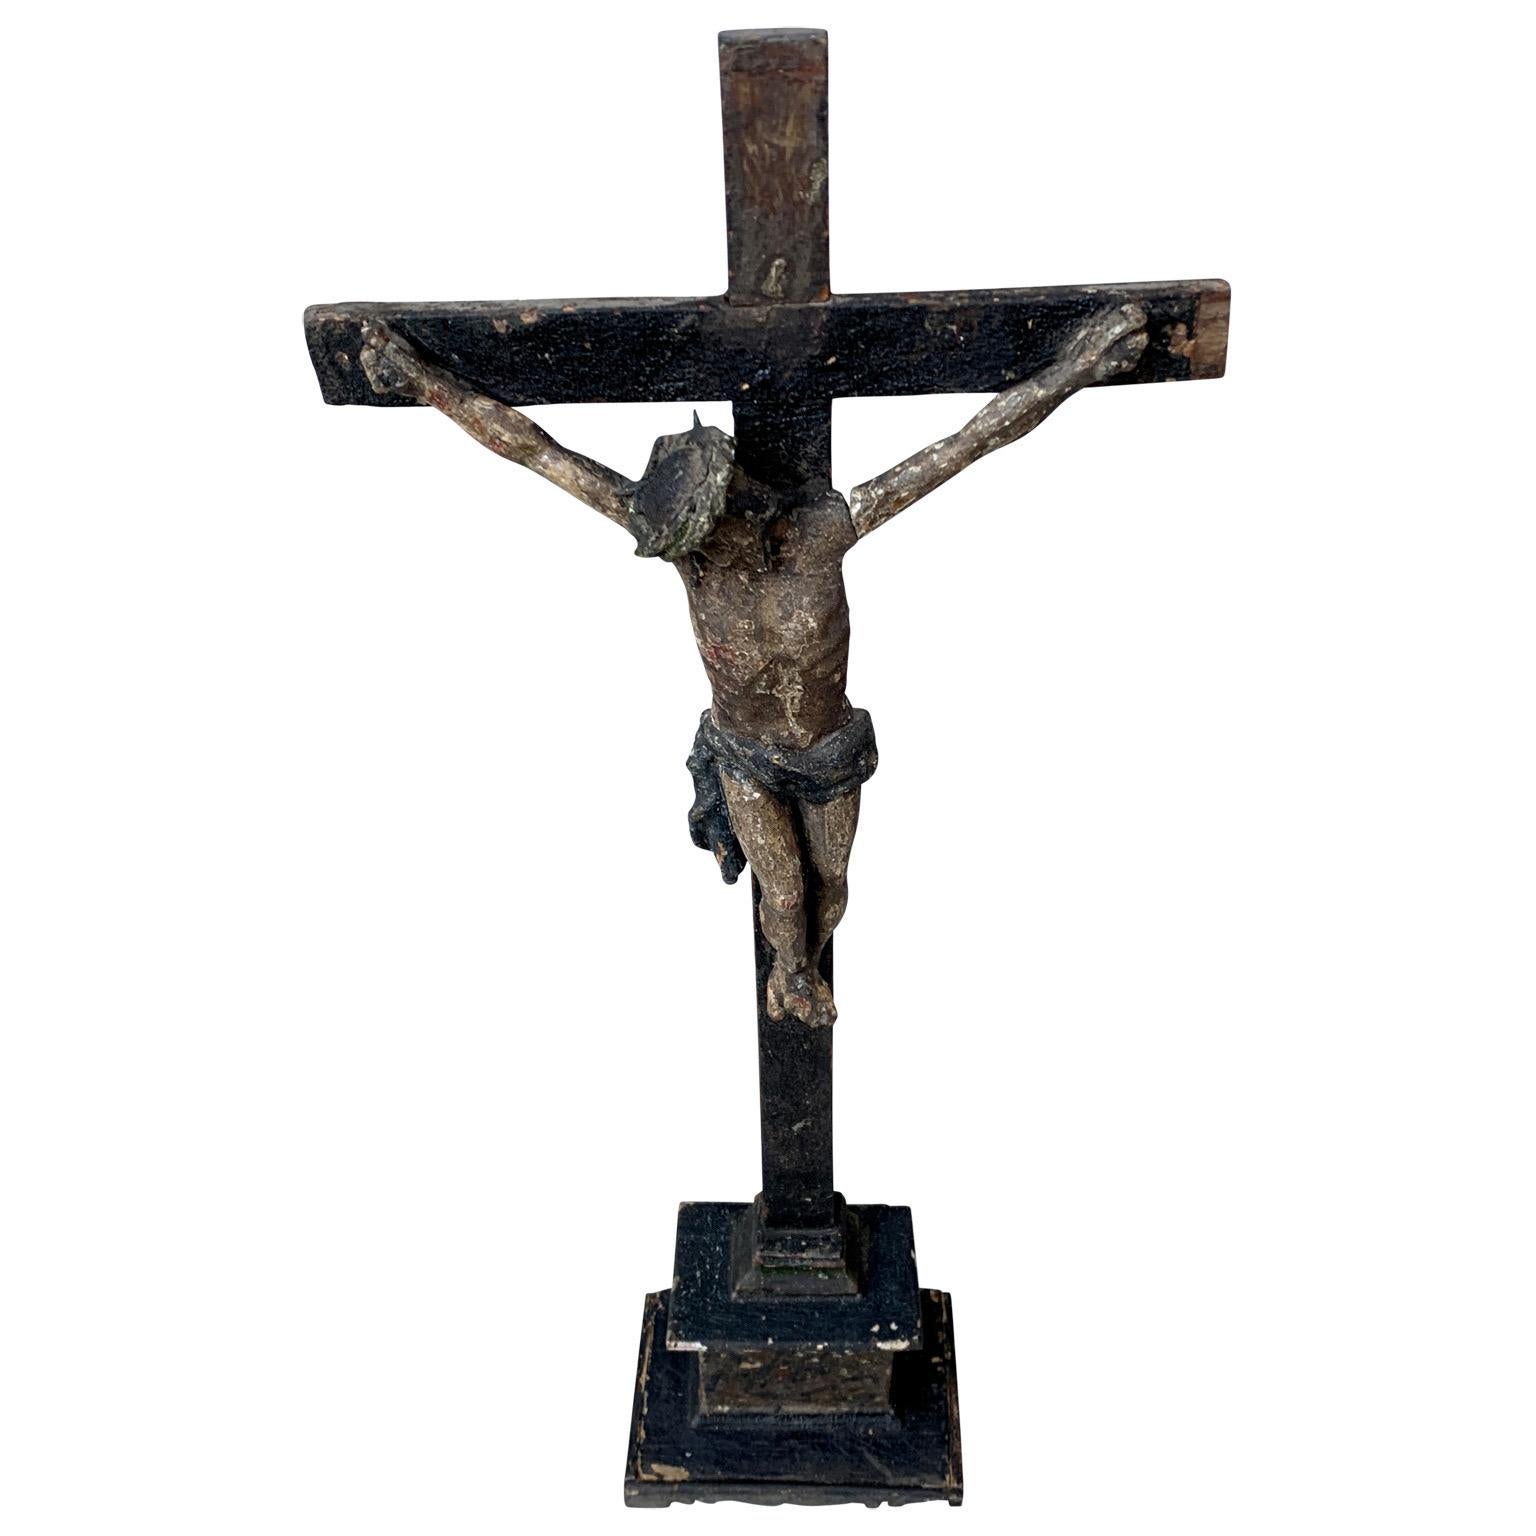 An early 18th Century antique hand carved and polychromed hand painted table crucifix from France with its original patina preserved.
This crucifix could possible date back as early as mid to late 17th Century. The crucifix has on its surfaces